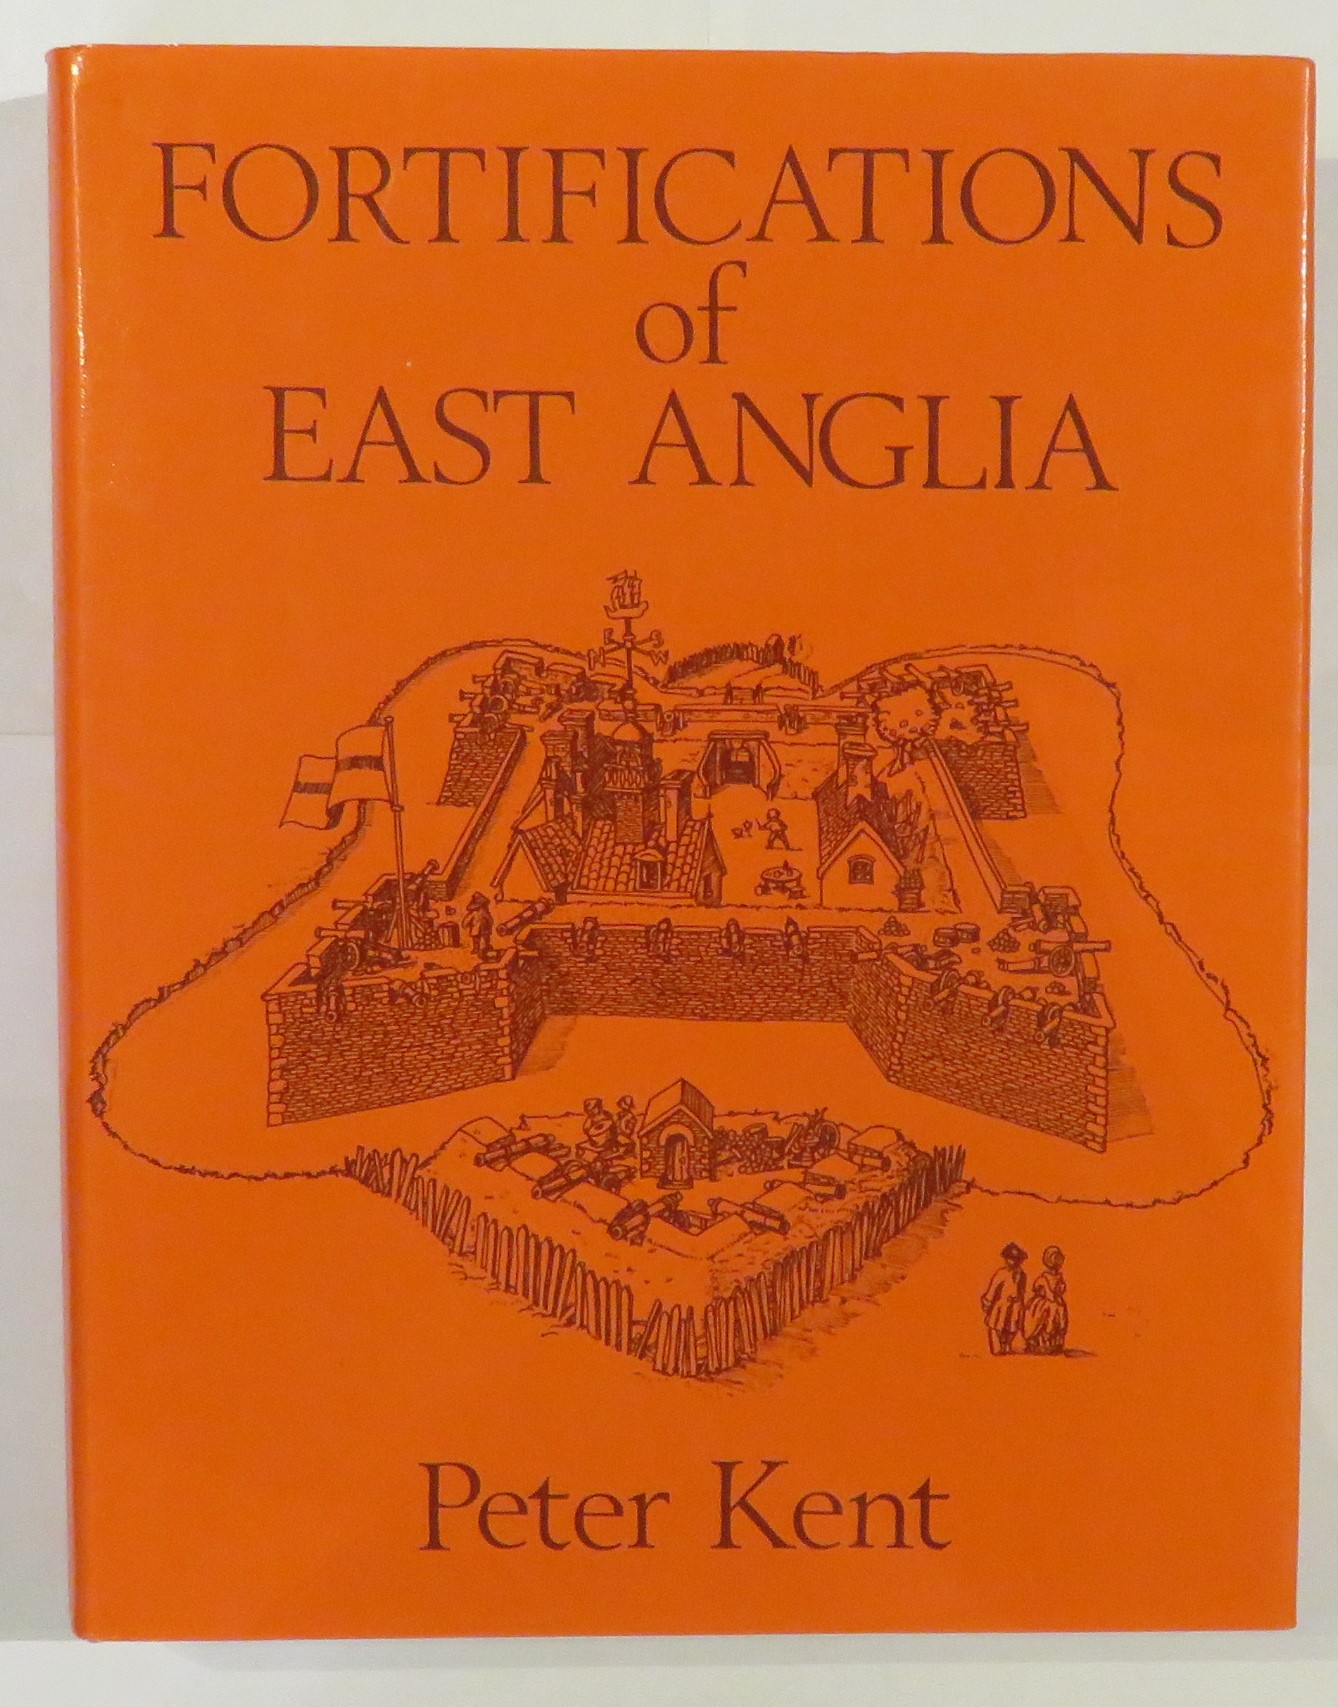 Fortifications of East Anglia